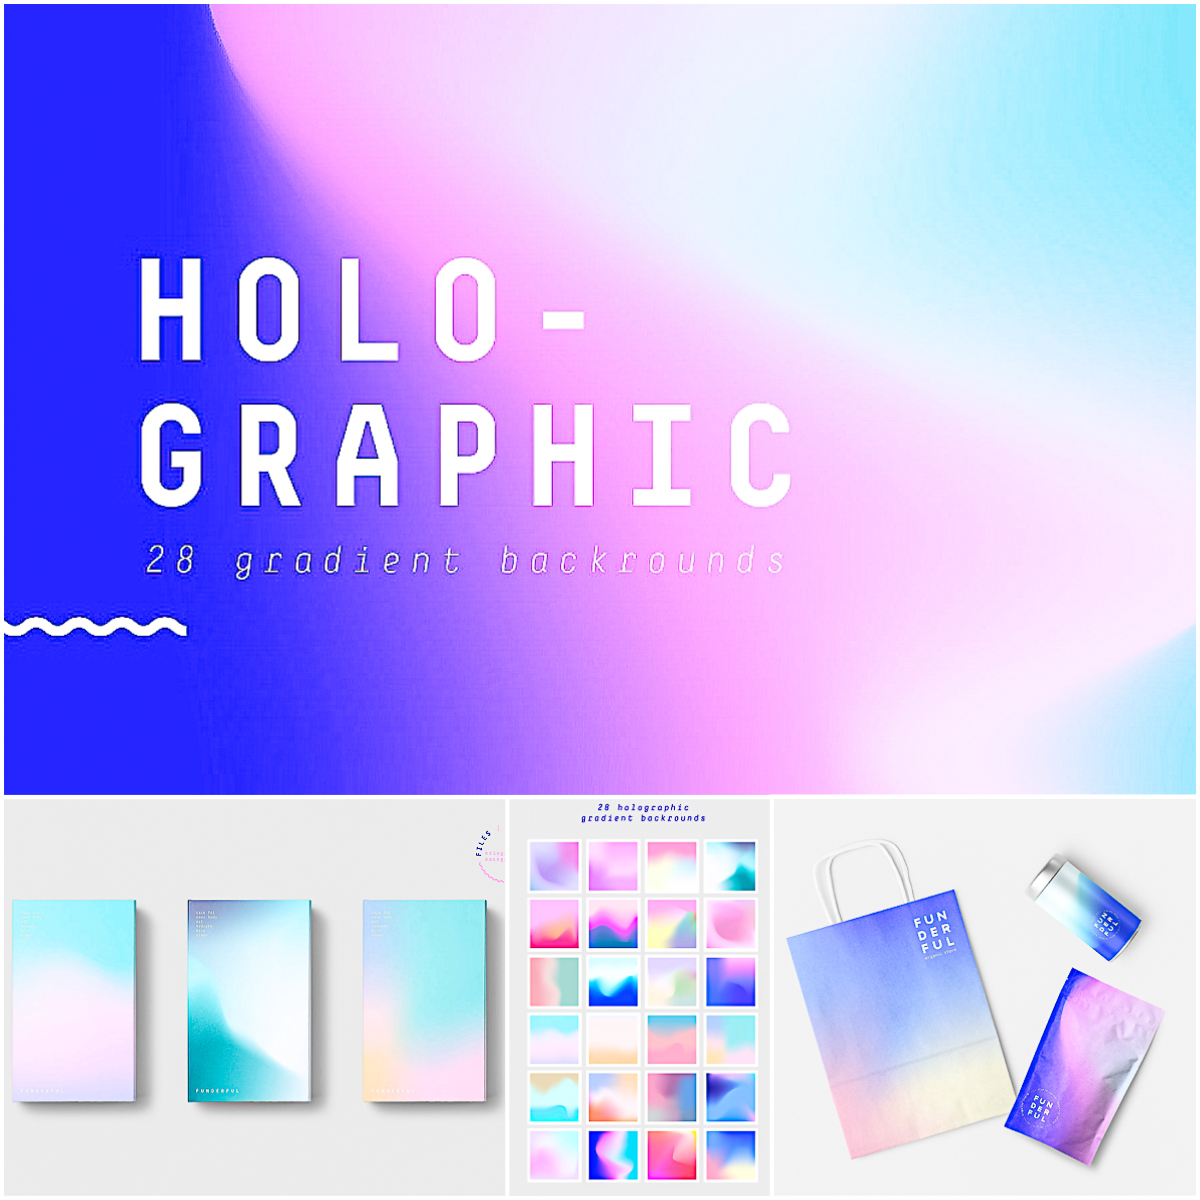 Holographic Gradient Backgrounds | Free download